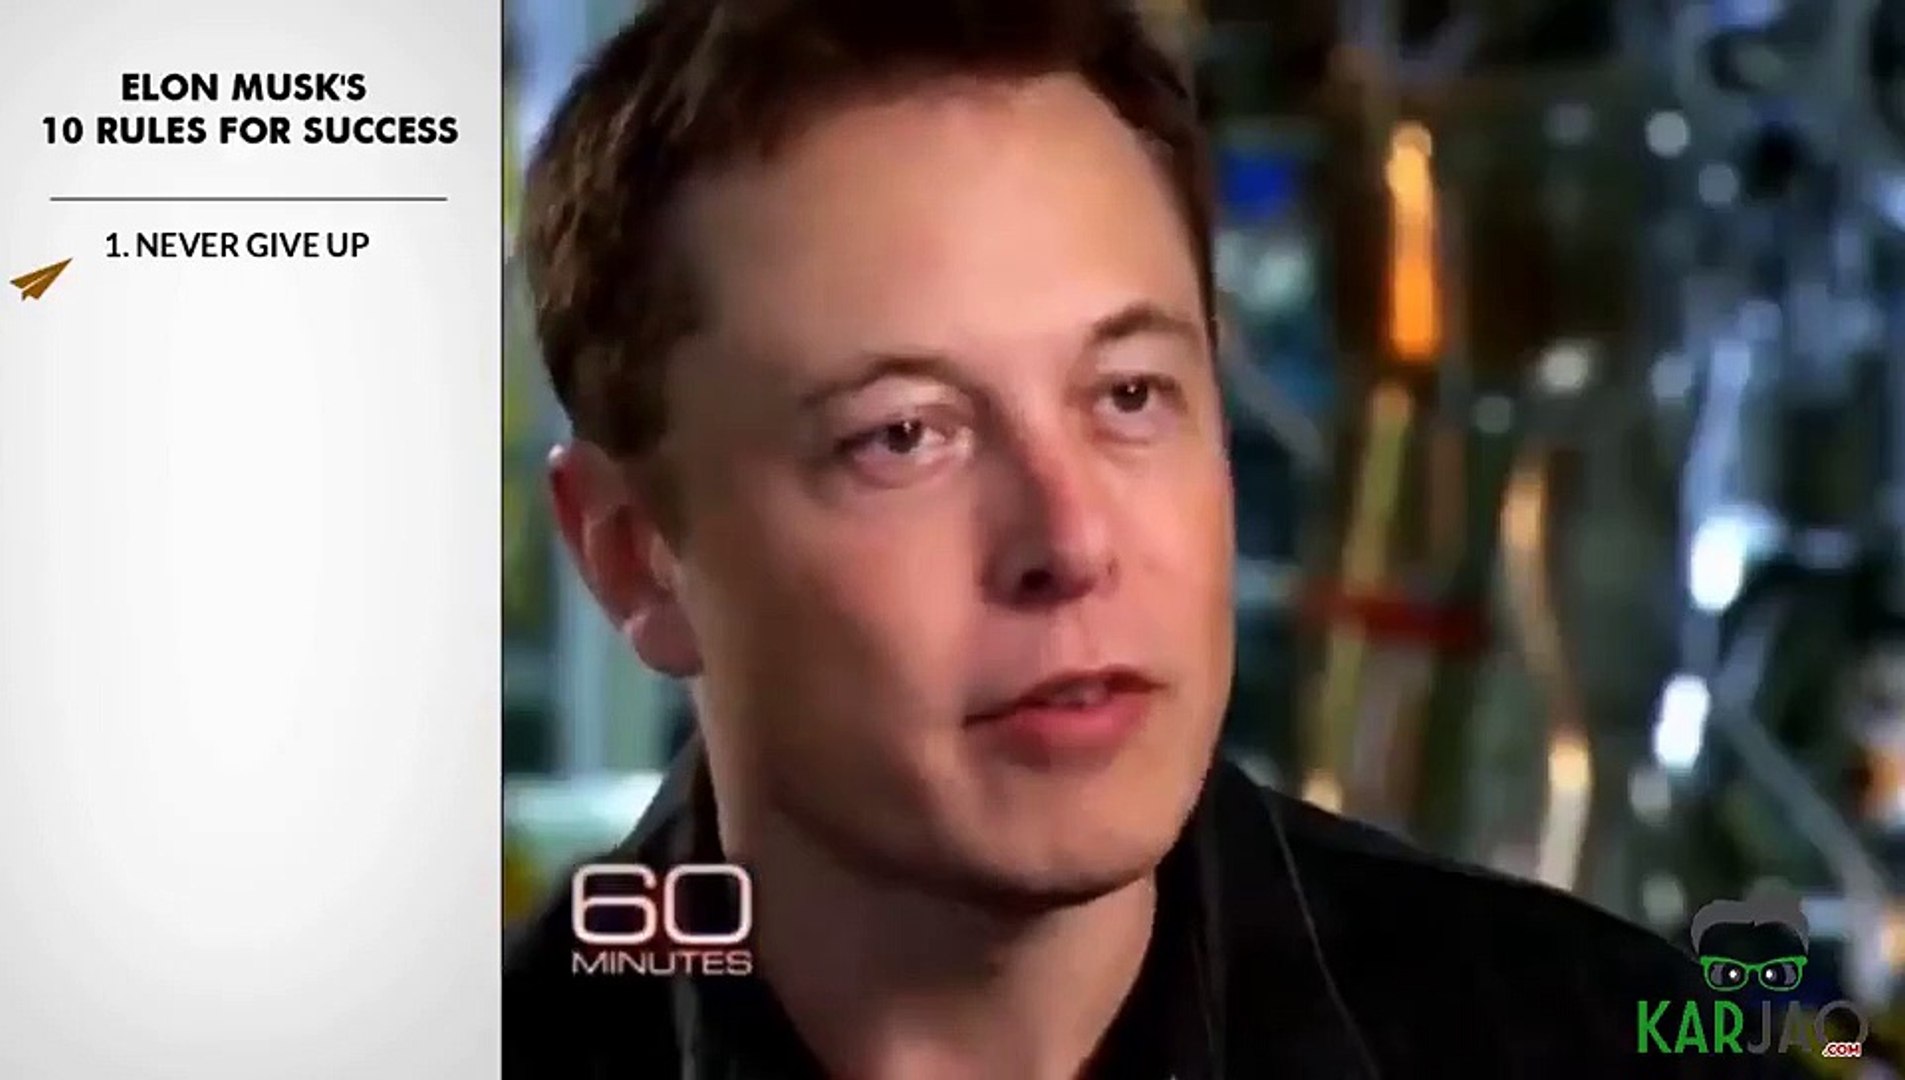 10 rules of success by Elon Musk